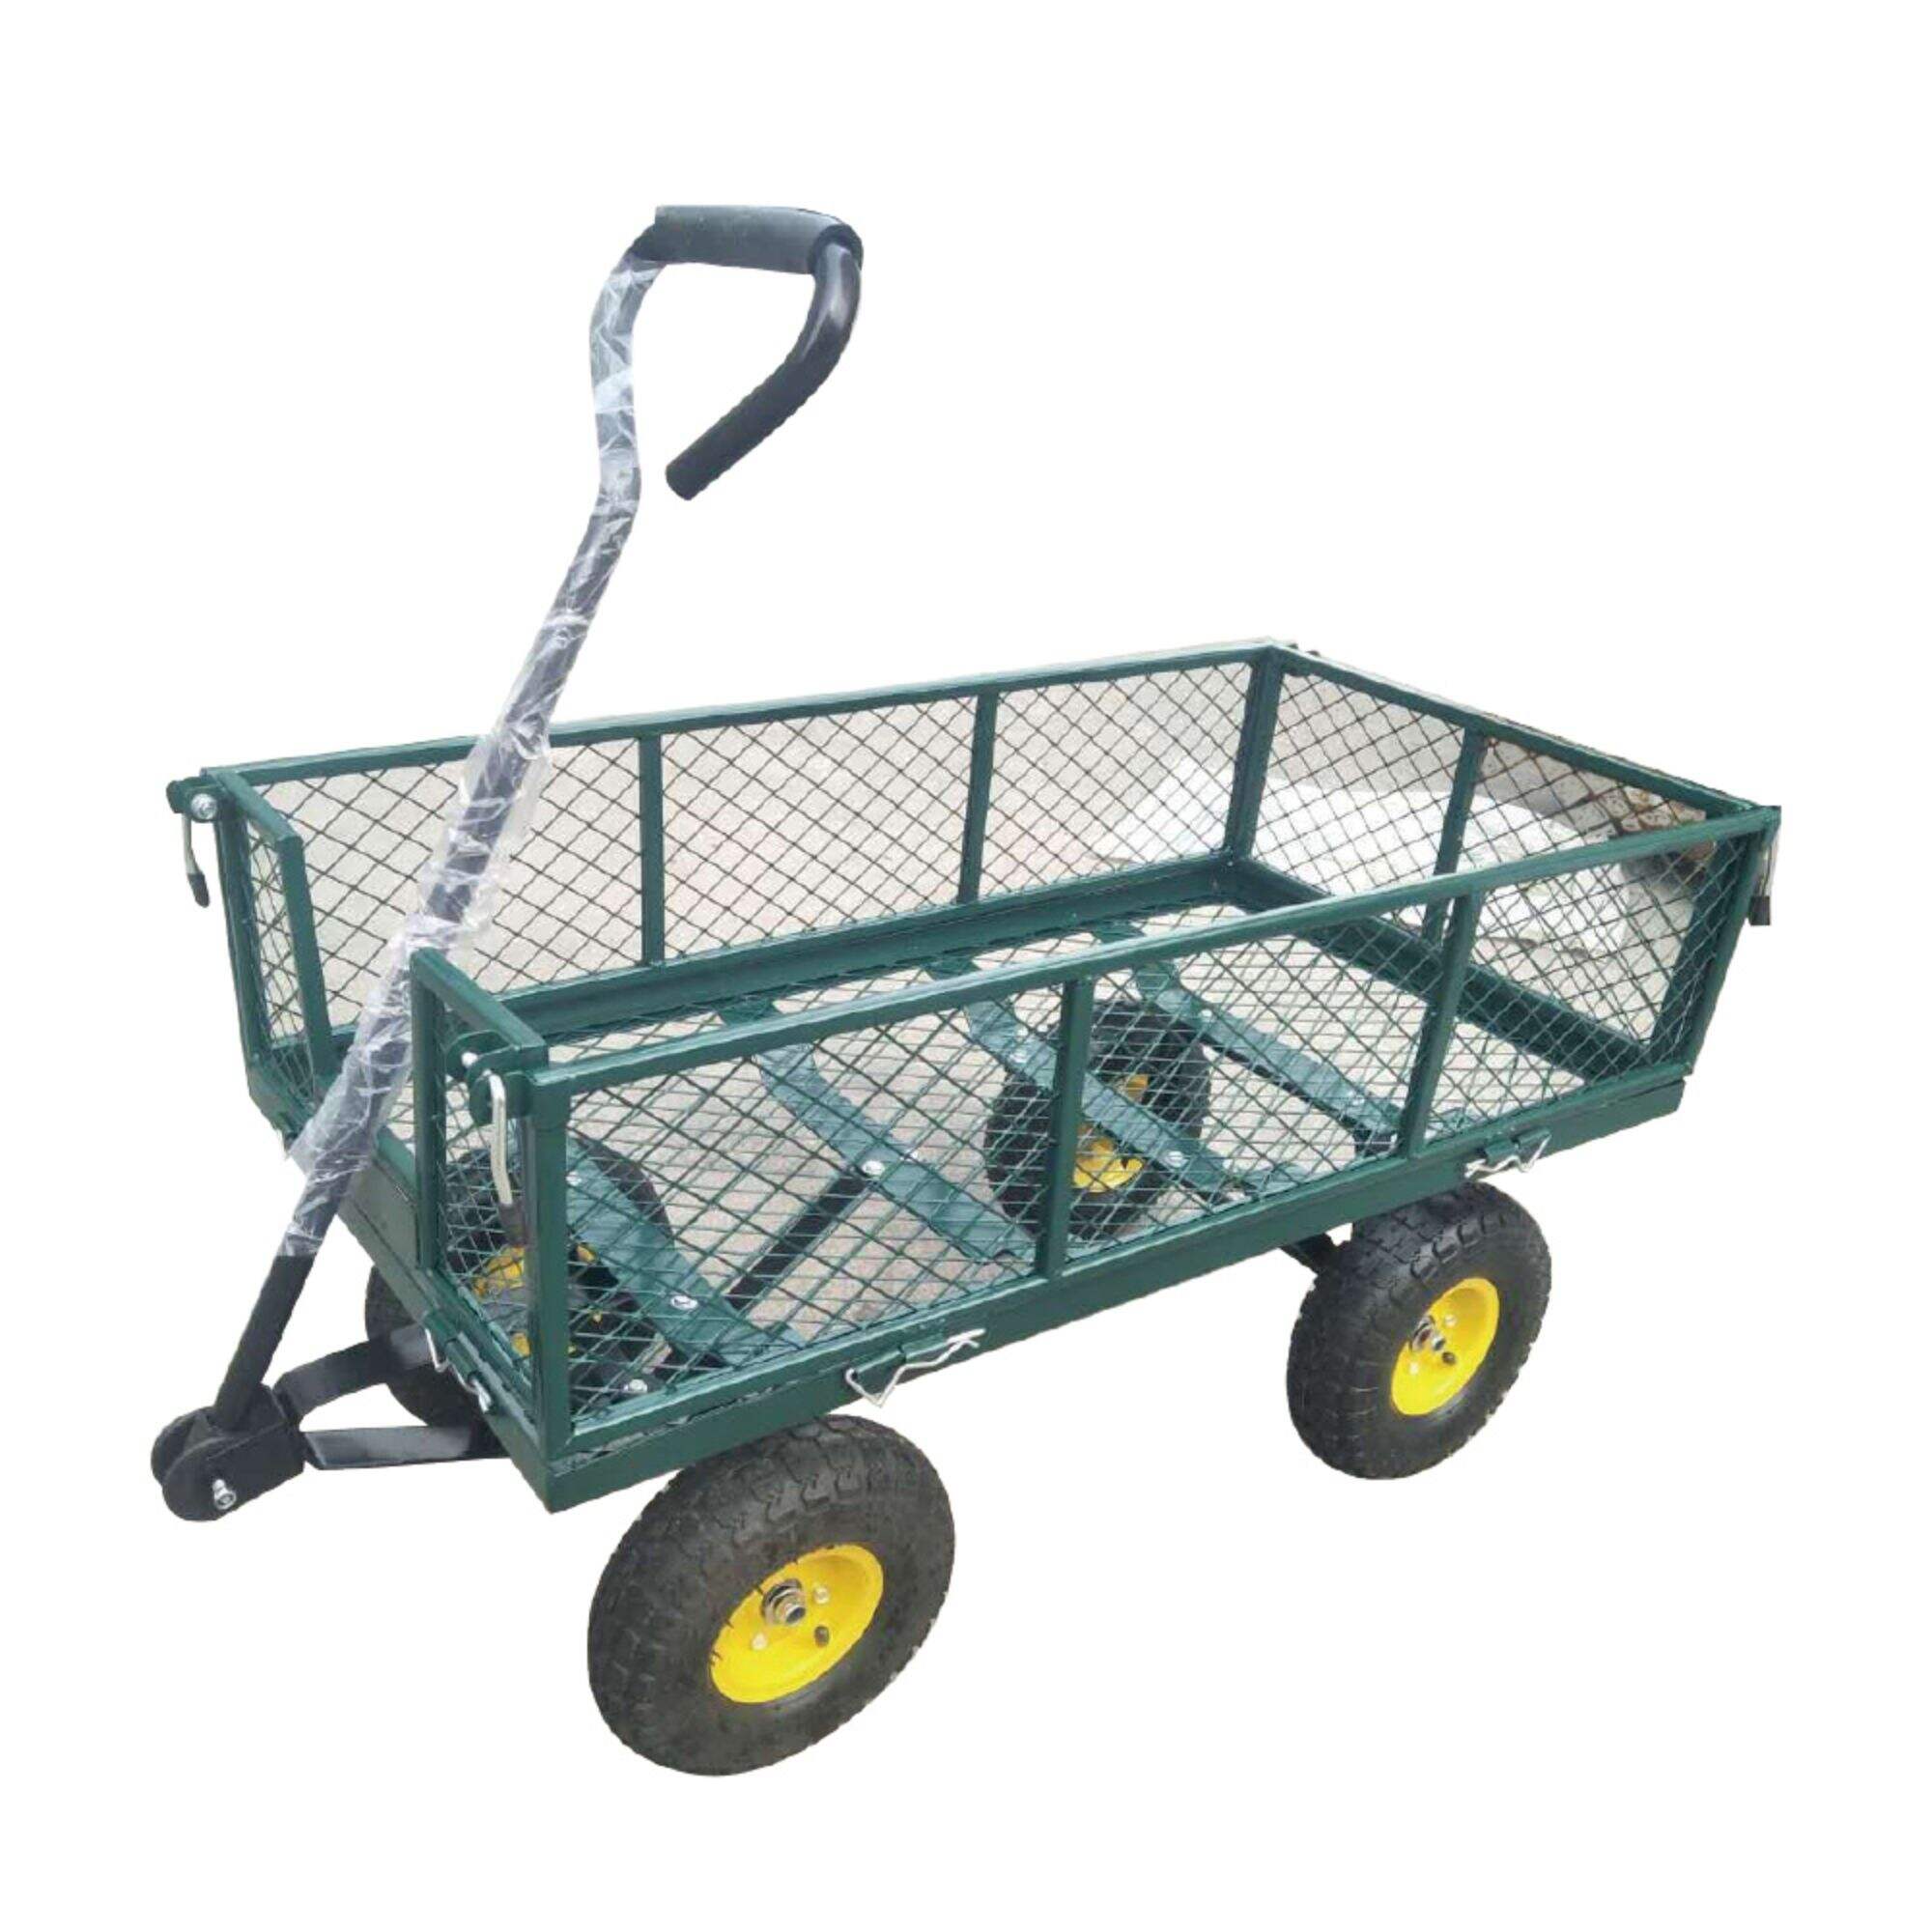 TC1840A Mesh Steel Garden Trolley Cart, Folding Utility Wagon, with Removable Sides, 10 Inch 3.50-4 Pneumatic Wheel, 300KG Capacity